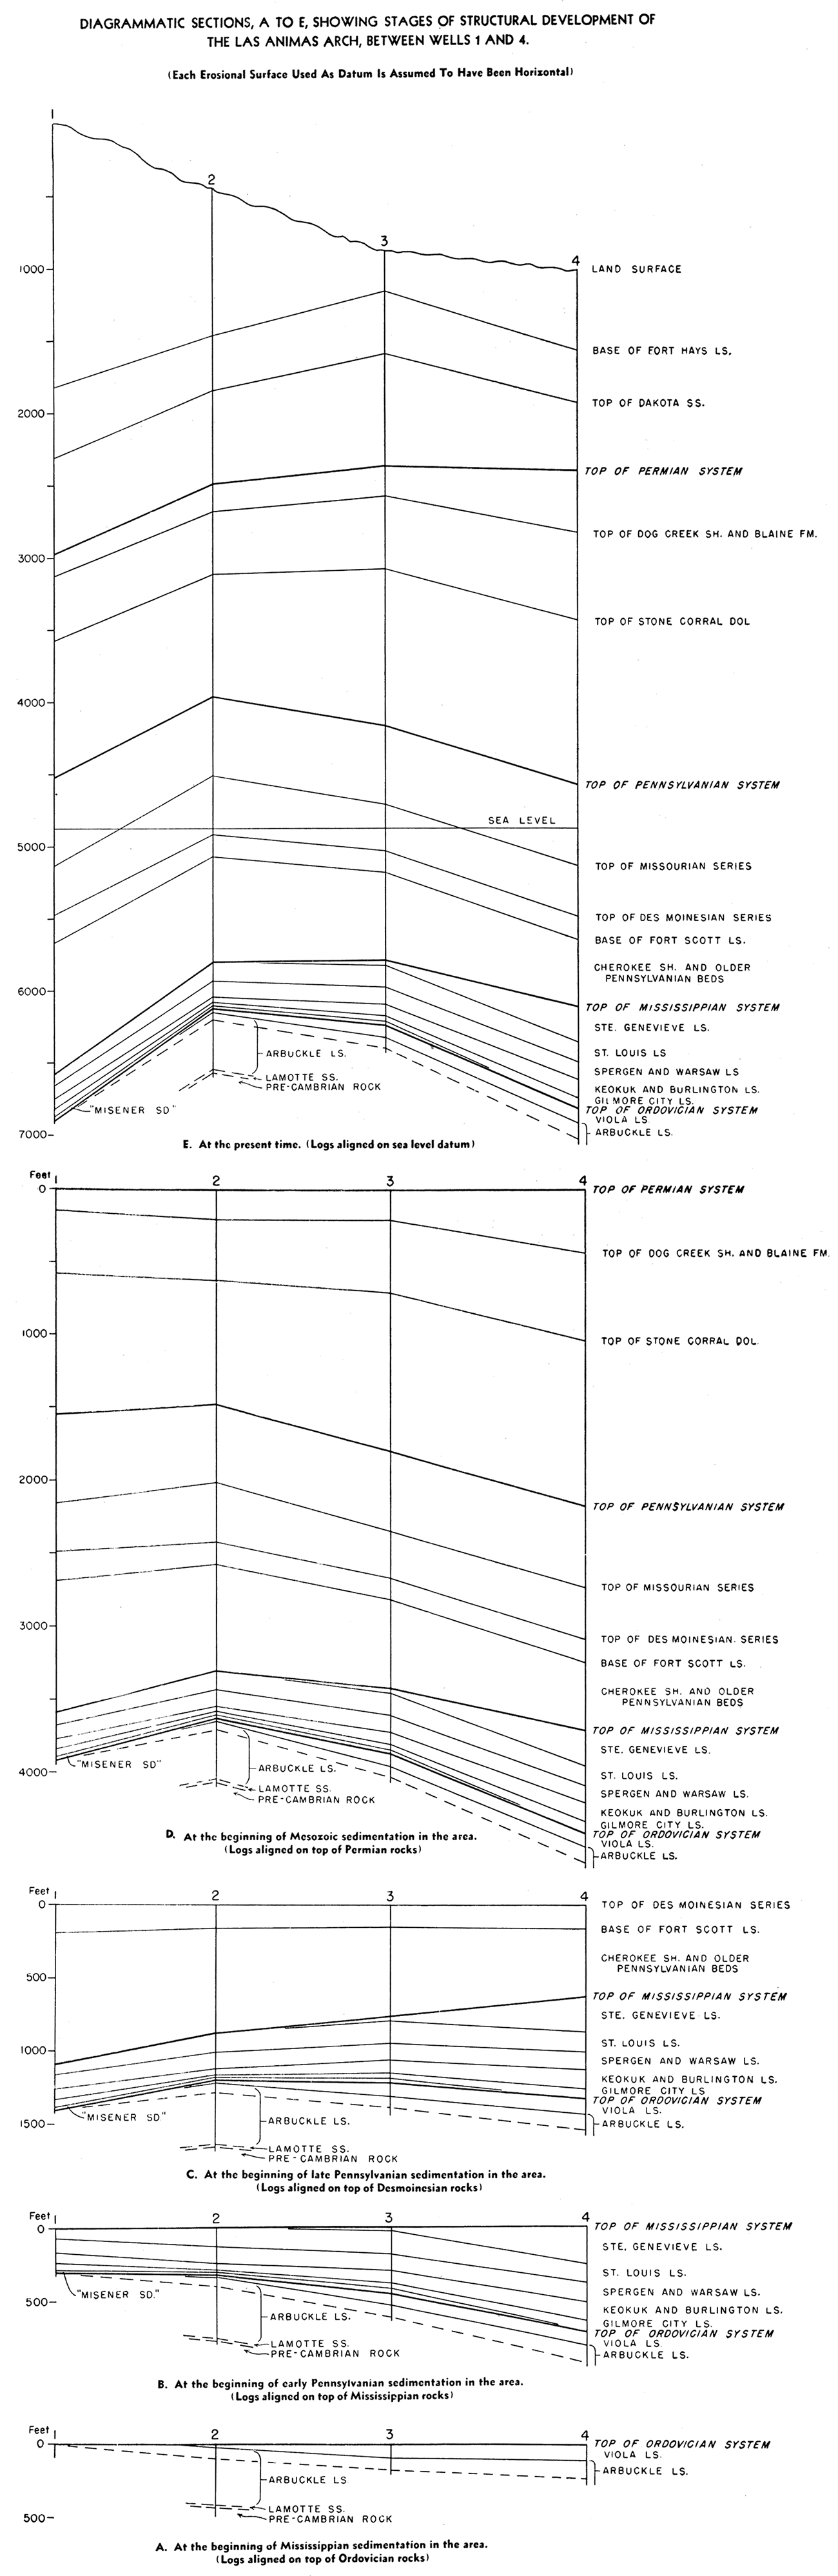 Diagrammatic sections showing stages of development of the Las Animas arch.